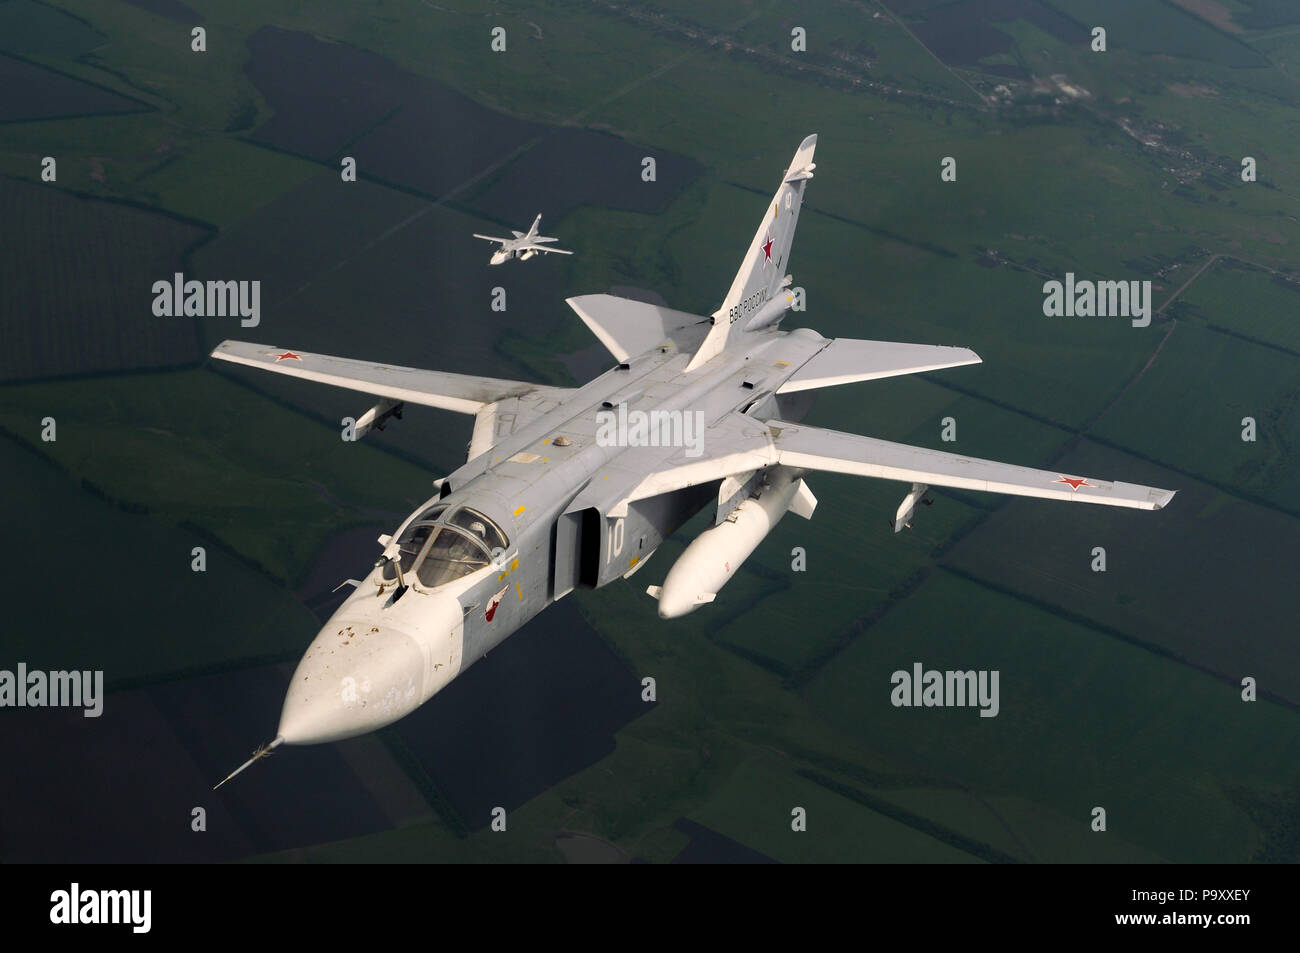 The Sukhoi Su-24M (NATO code - Fencer)  supersonic, all-weather attack aircraft/interdictor of Russian Air Force in flight. Stock Photo